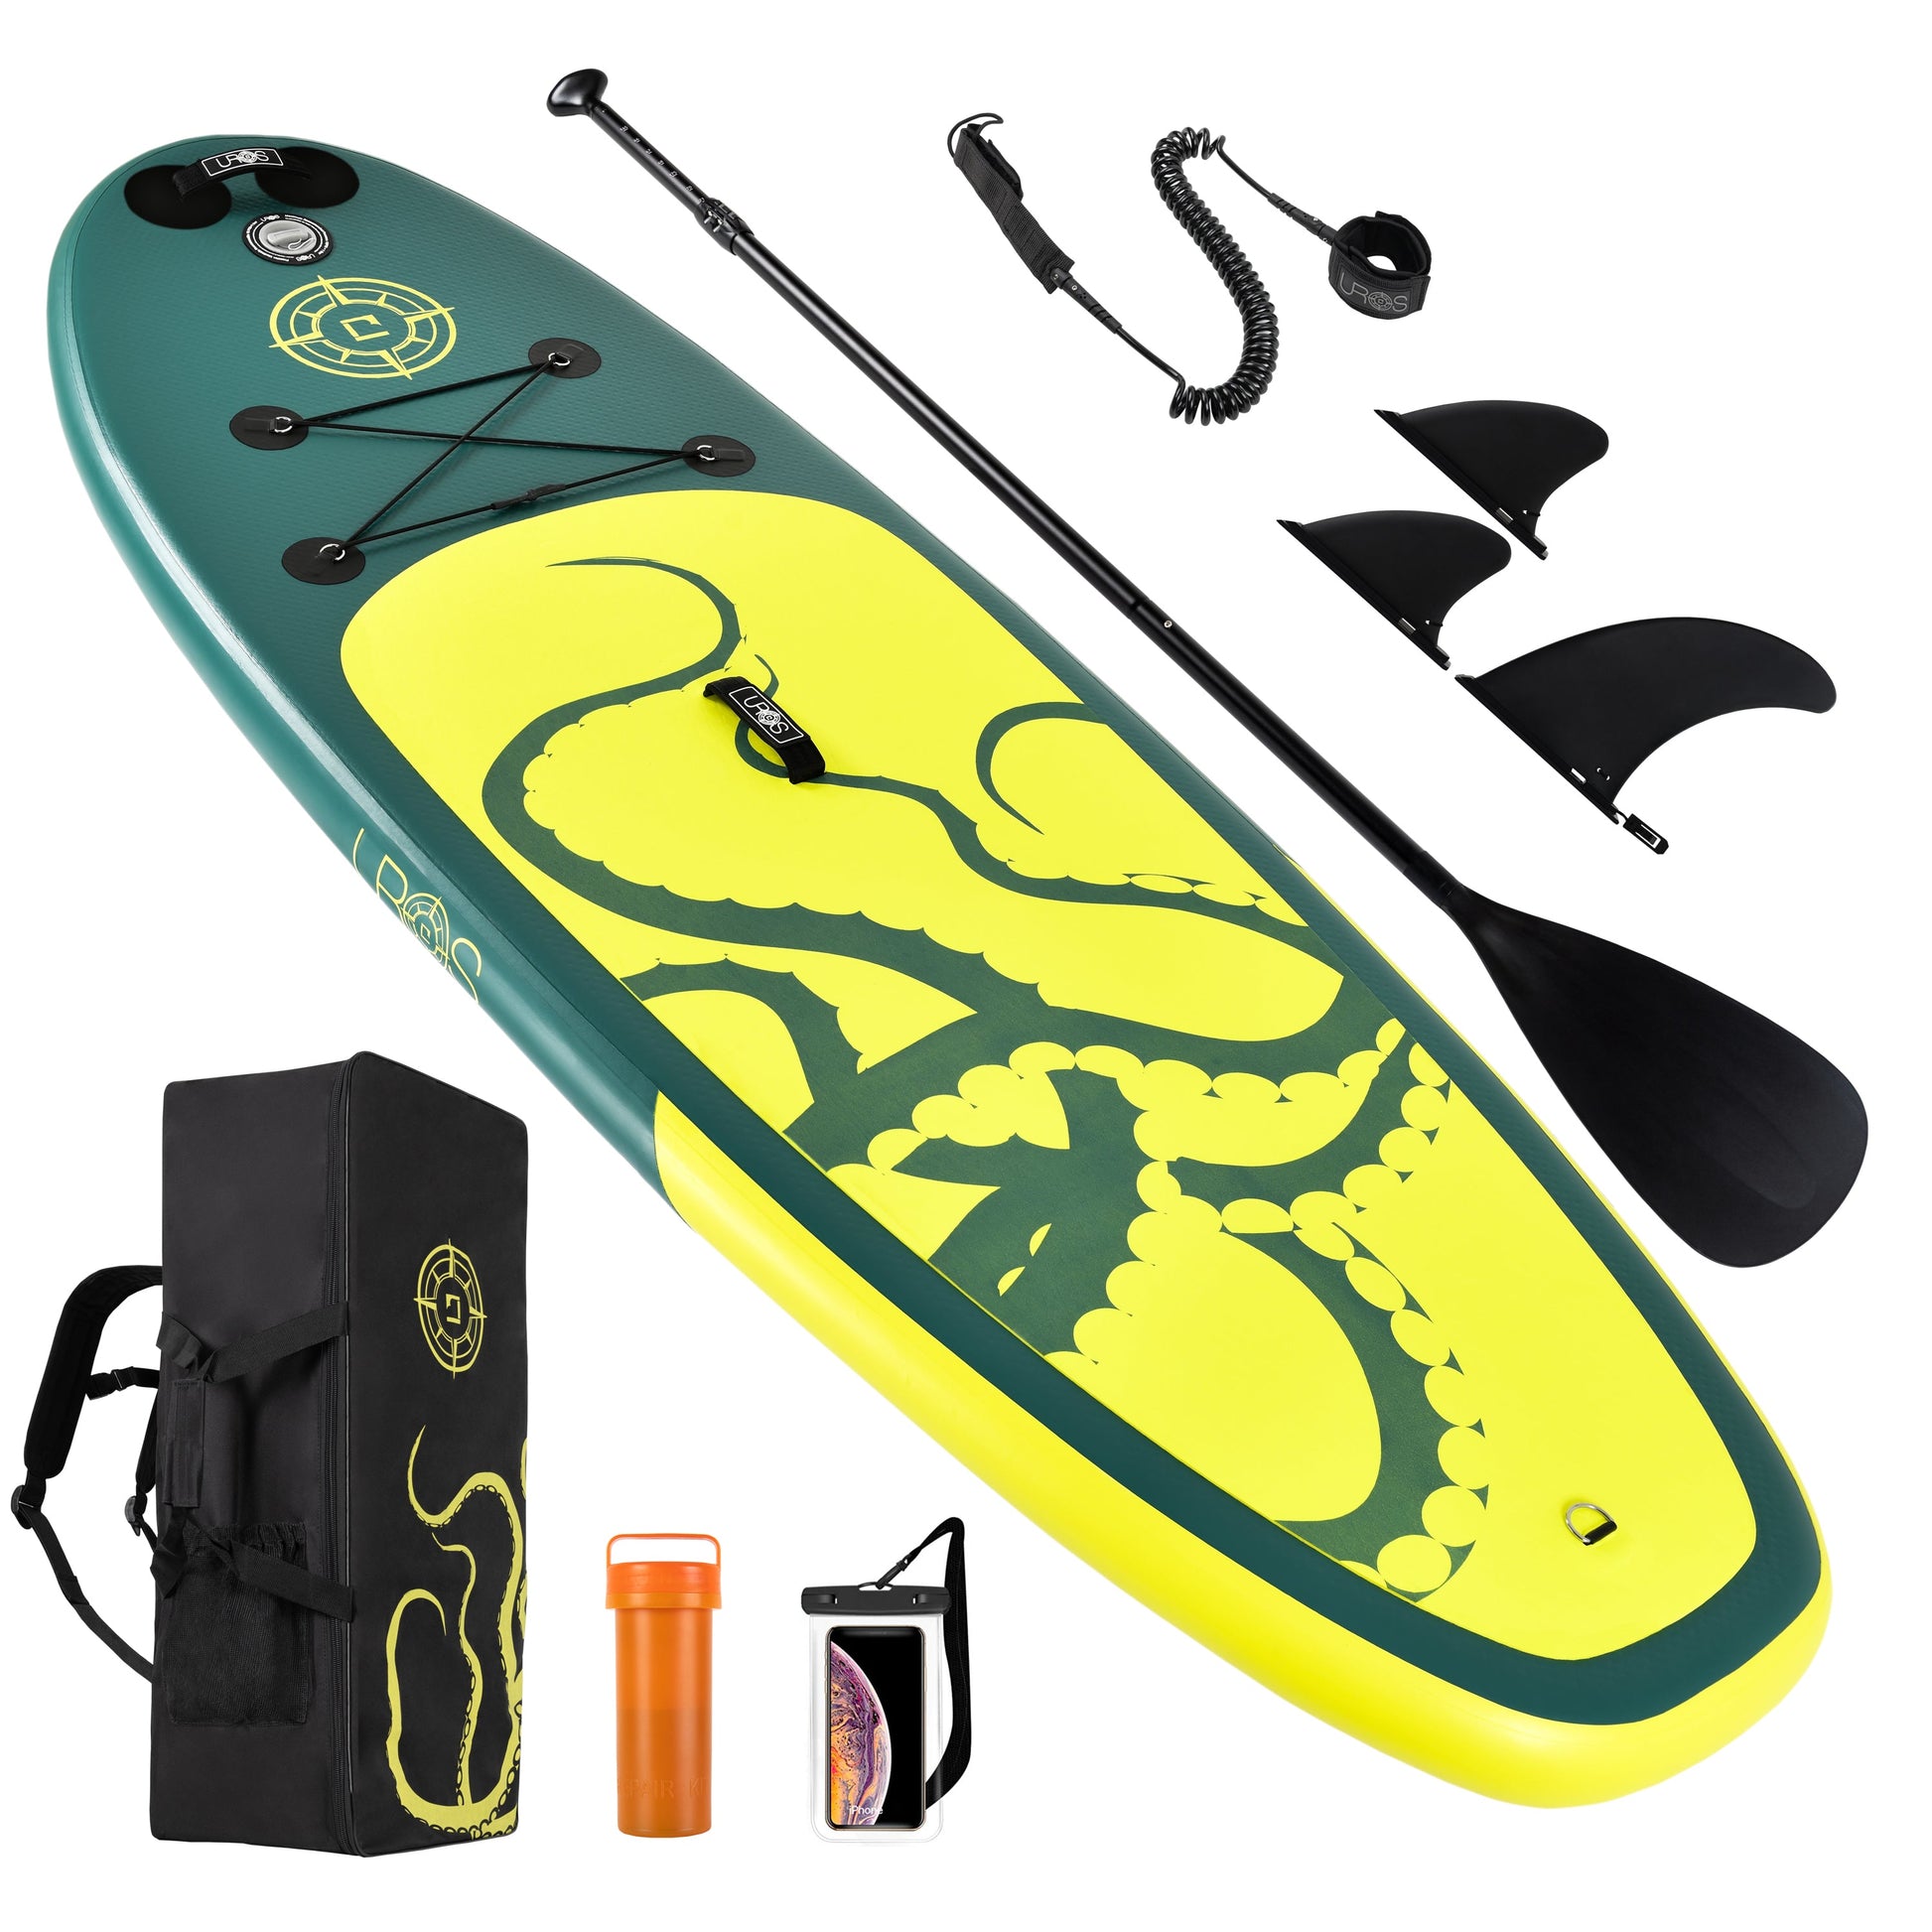  Best Inflatable Paddle Board Complete Kit Overview